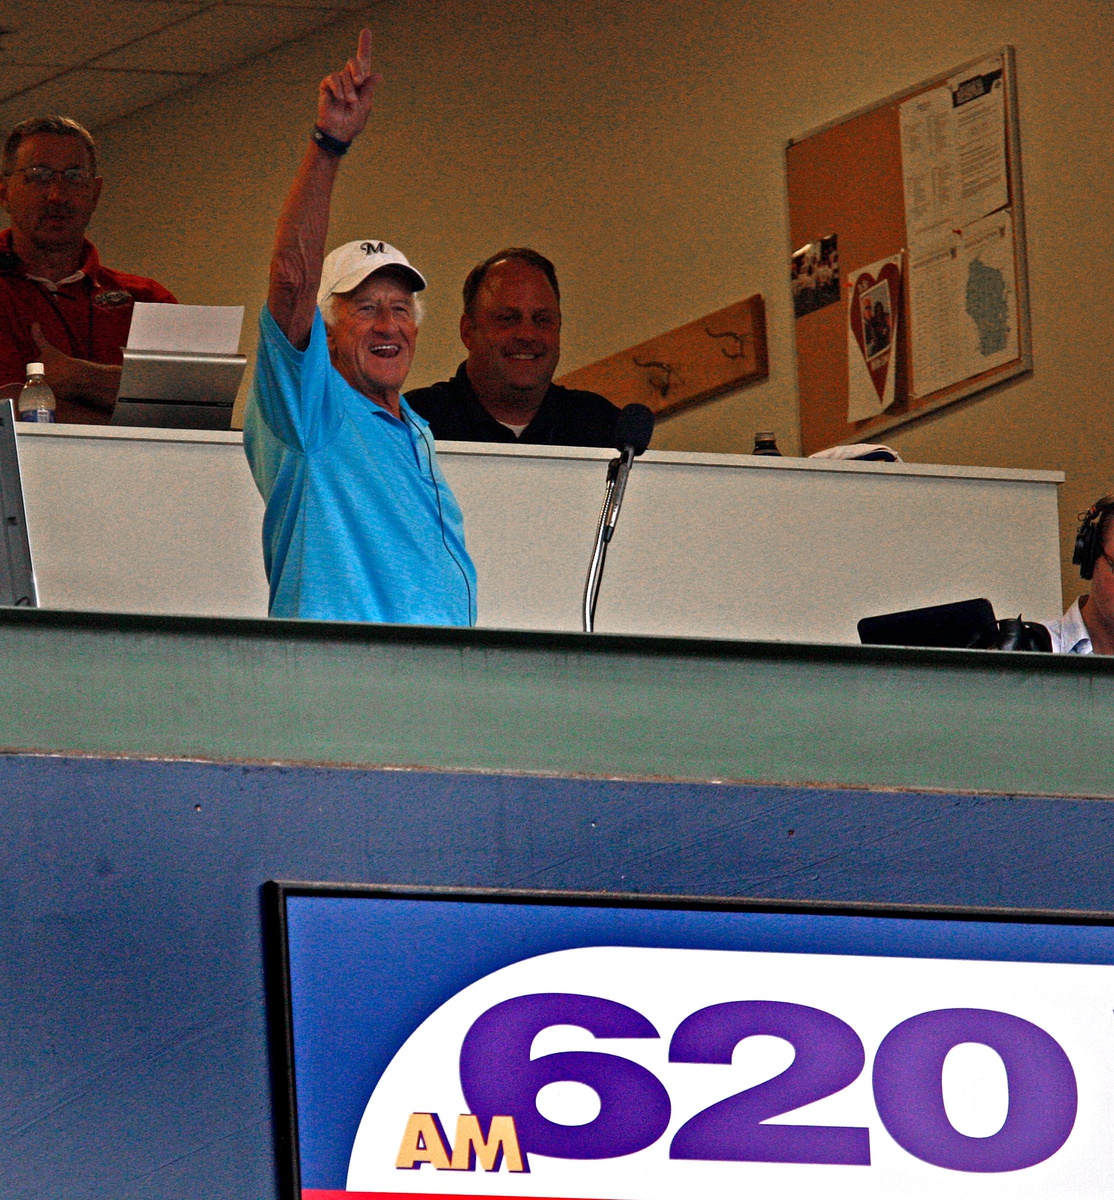 Bob Uecker Day in Wisconsin on Saturday, Sept. 25